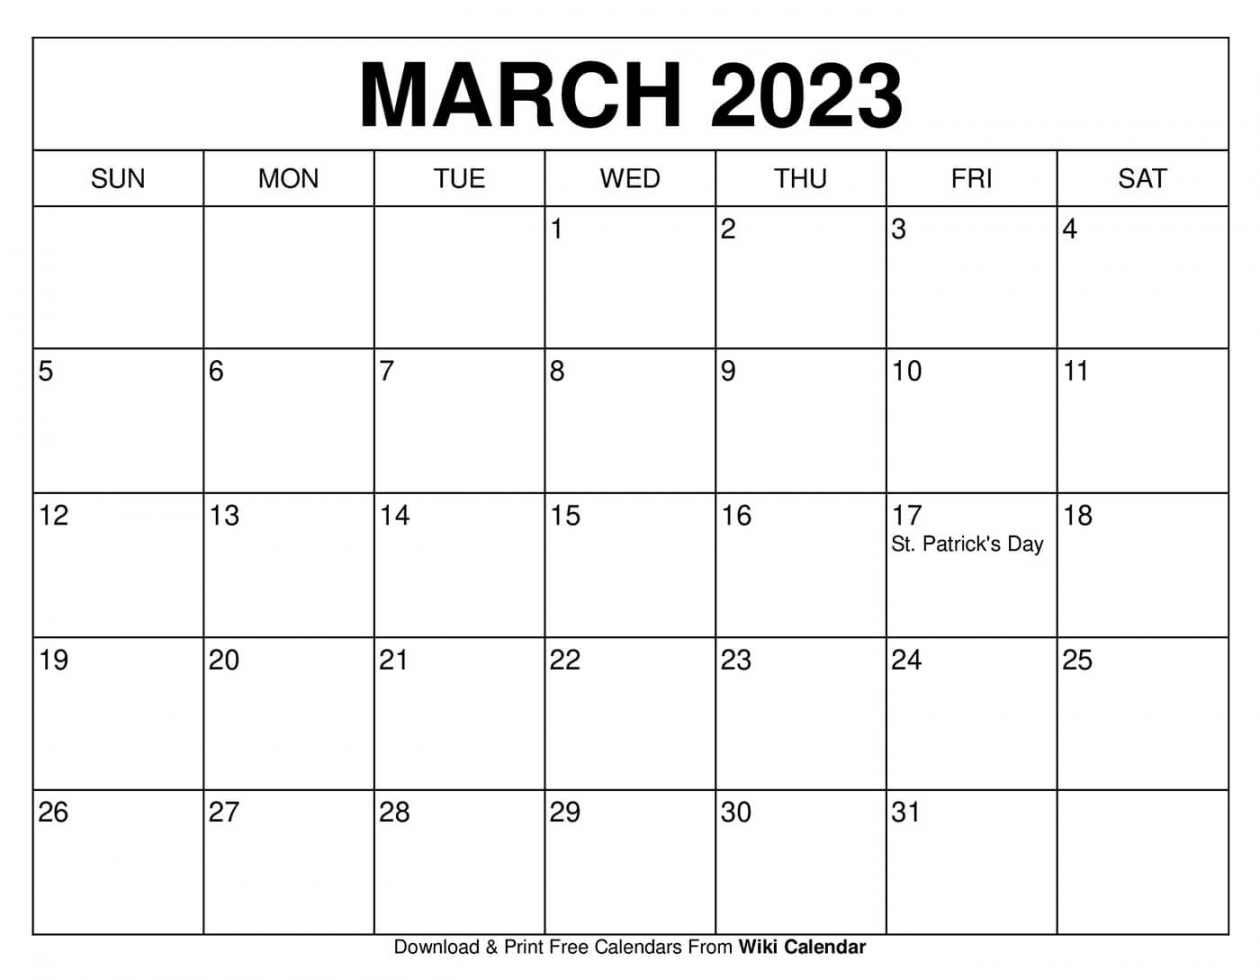 Free Printable March  Calendar Templates With Holidays - FREE Printables - Free Printable March 2023 Calendar